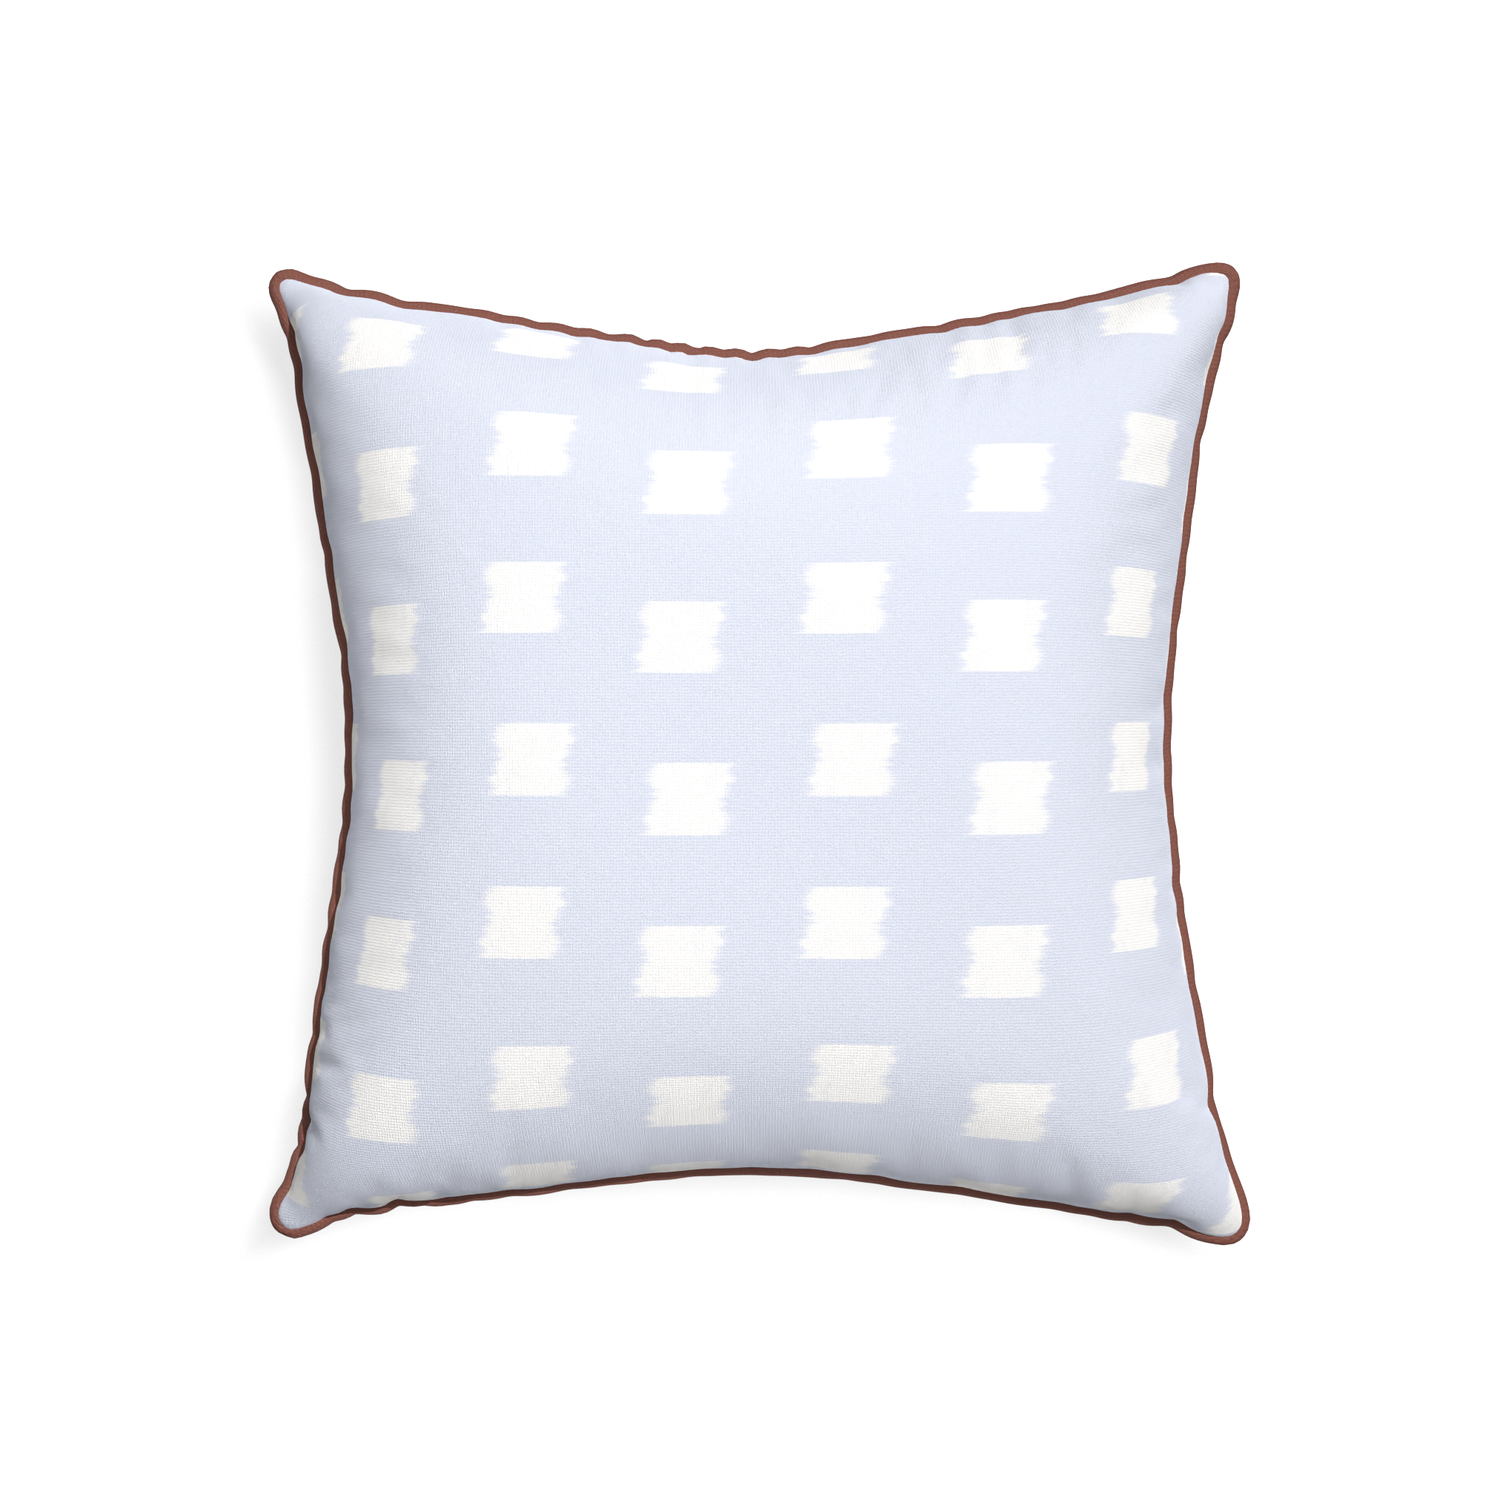 22-square denton custom sky blue patternpillow with w piping on white background